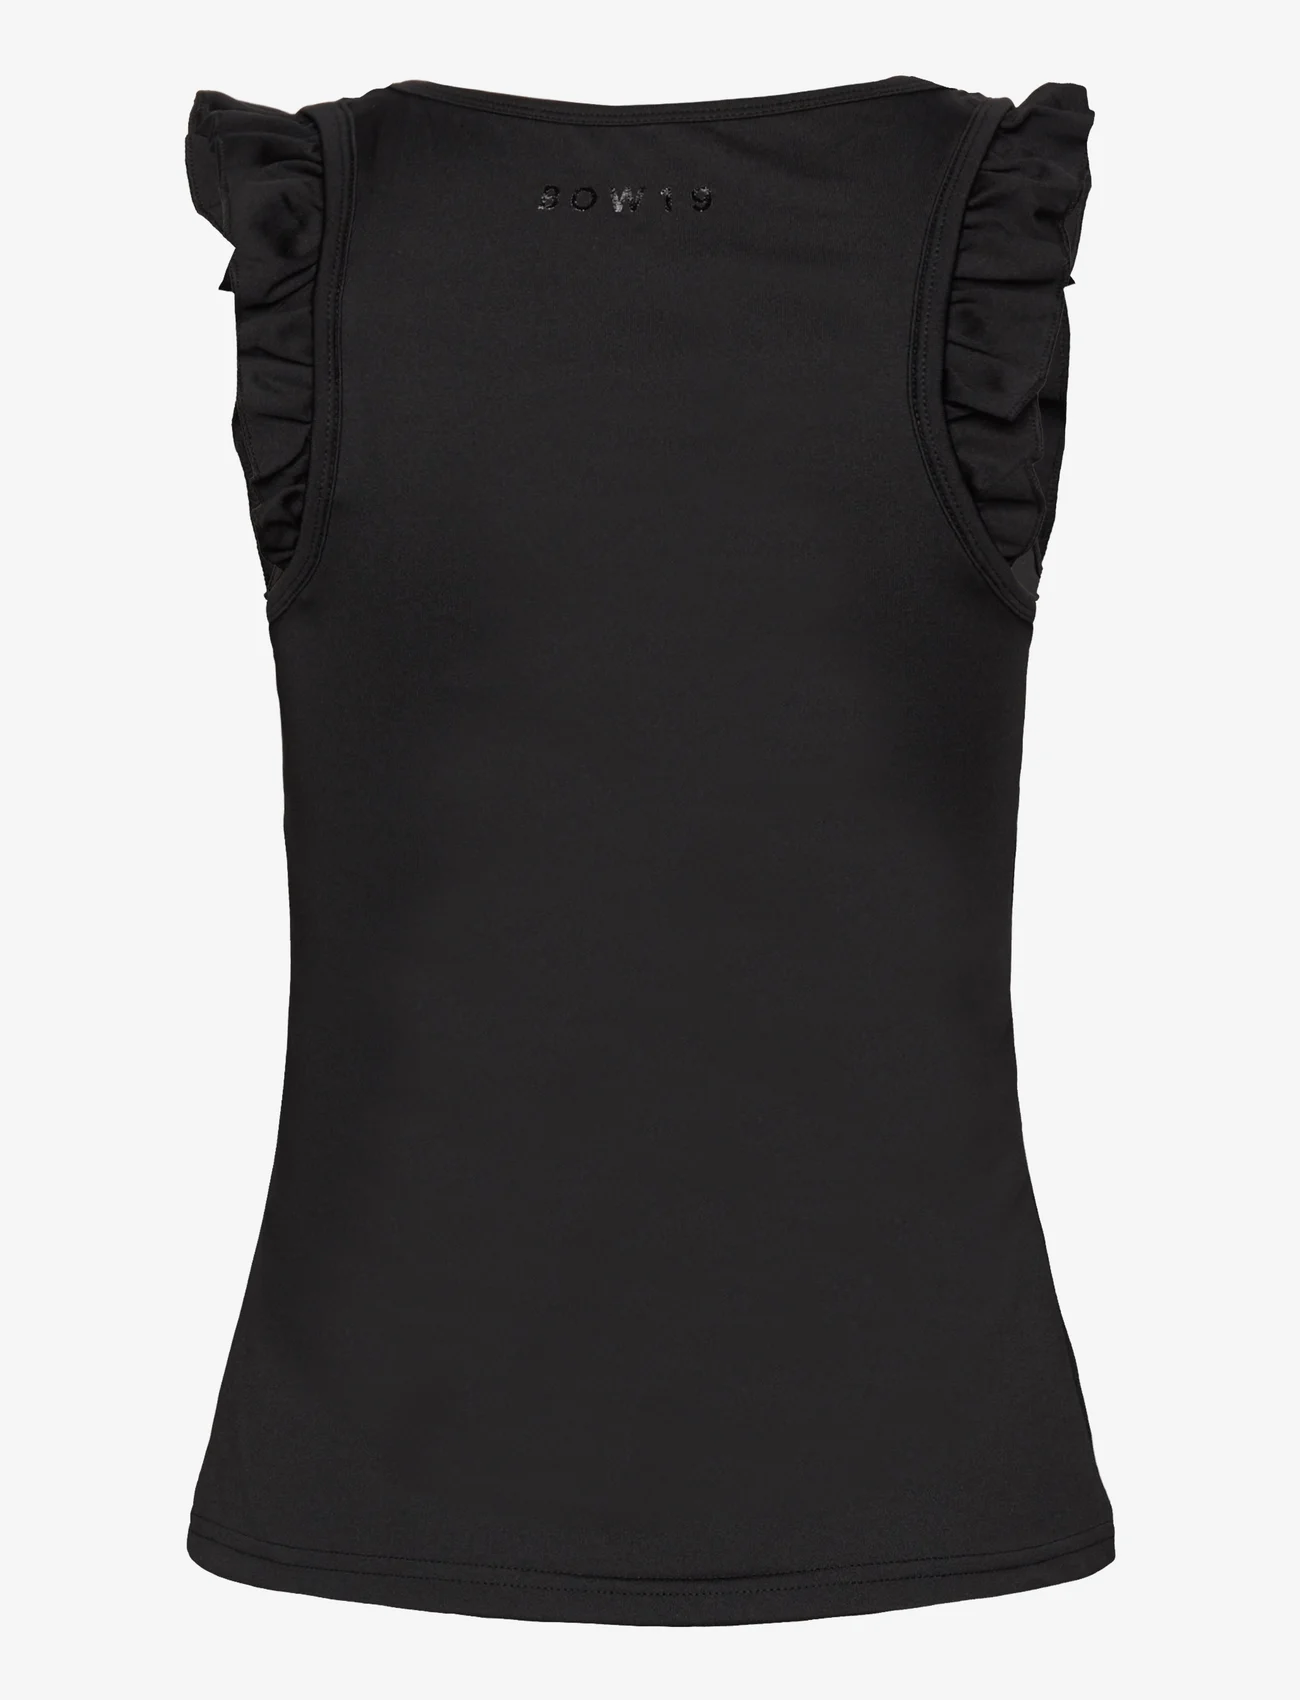 BOW19 - Liv tank top - lowest prices - black - 1